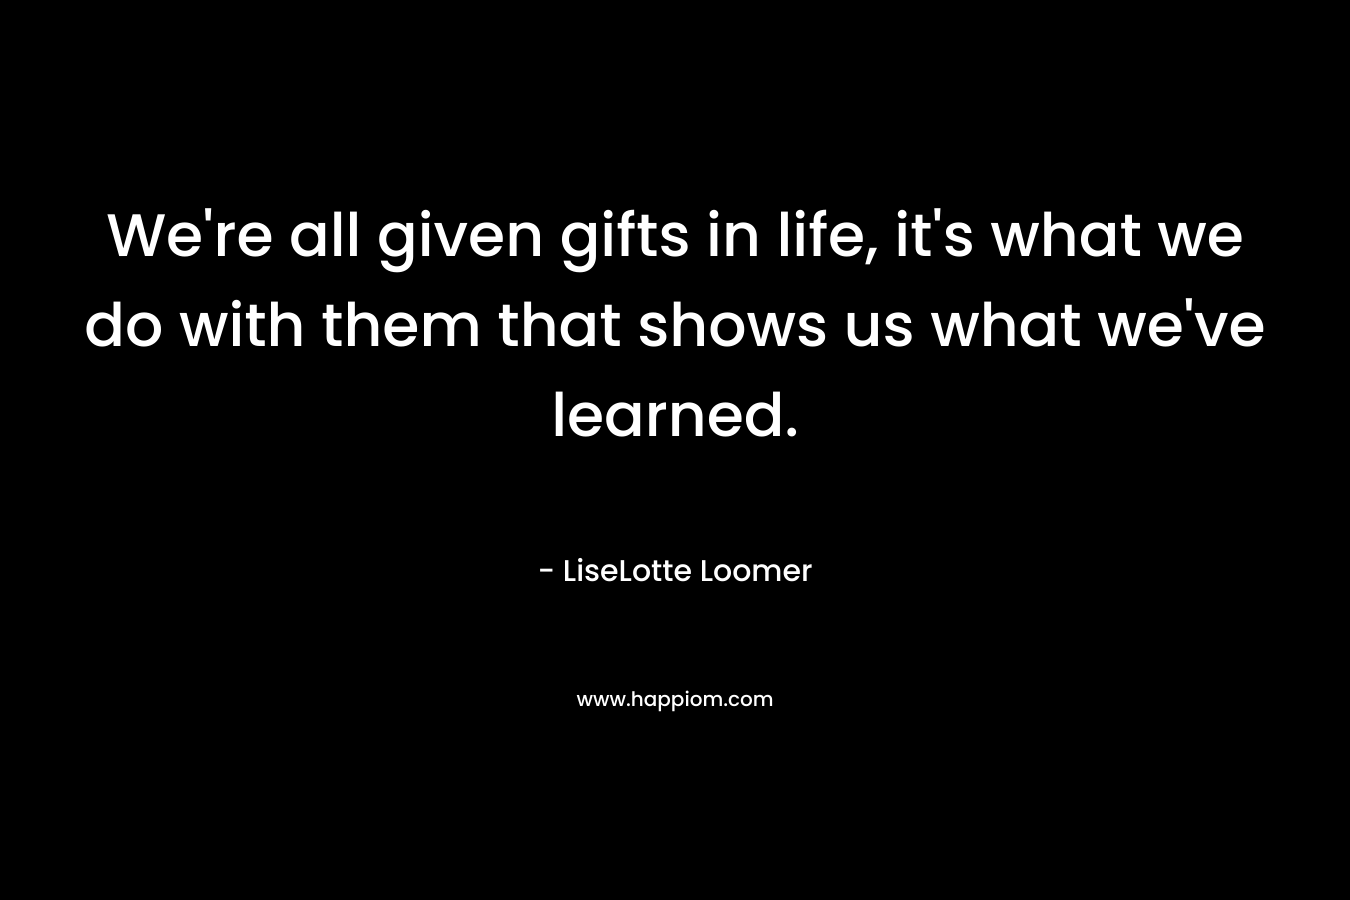 We're all given gifts in life, it's what we do with them that shows us what we've learned.